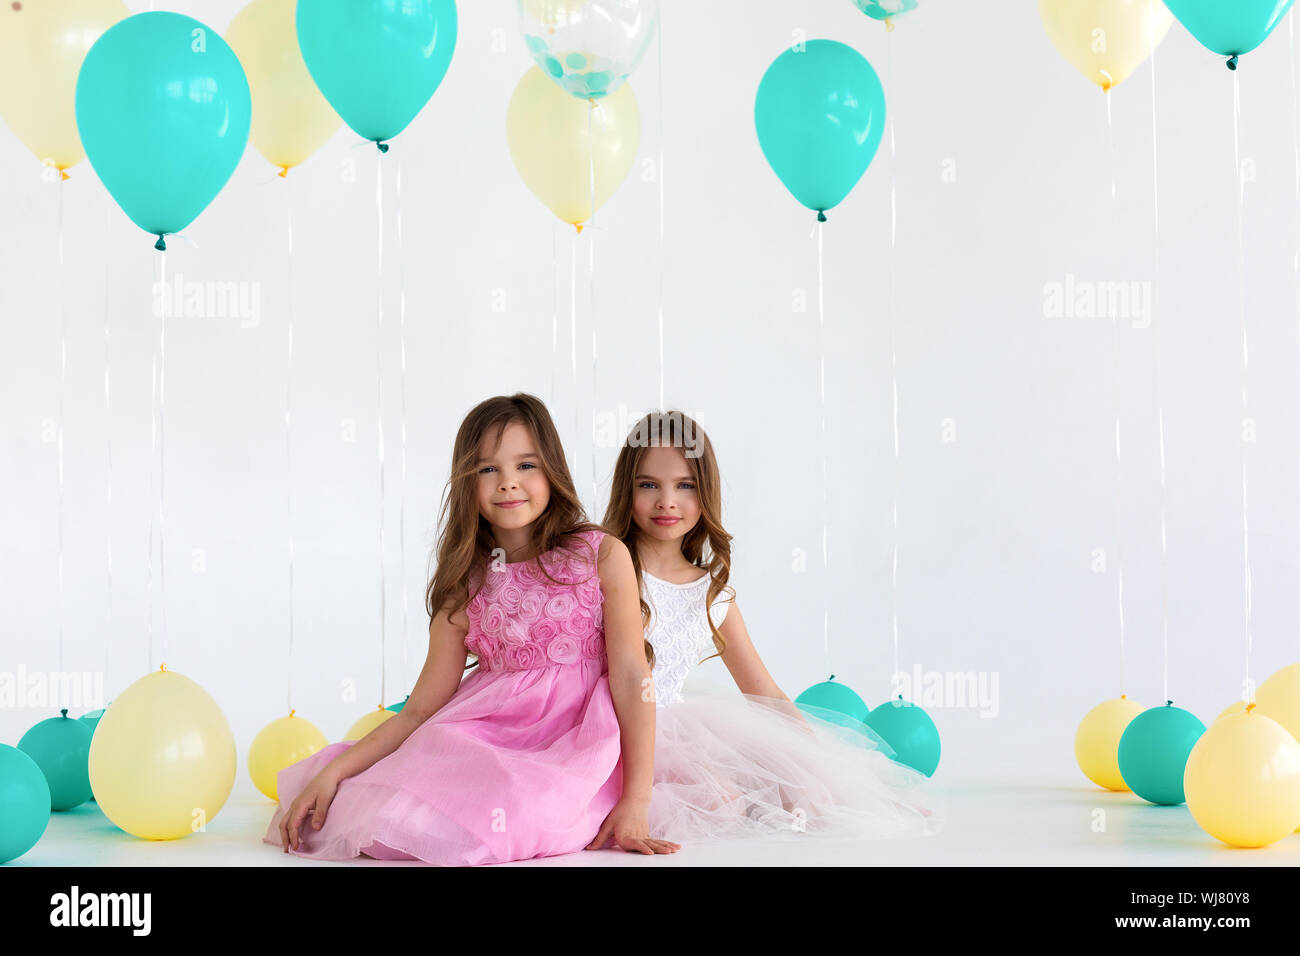 Two sisters on balloons party - isolated over a white background Stock Photo